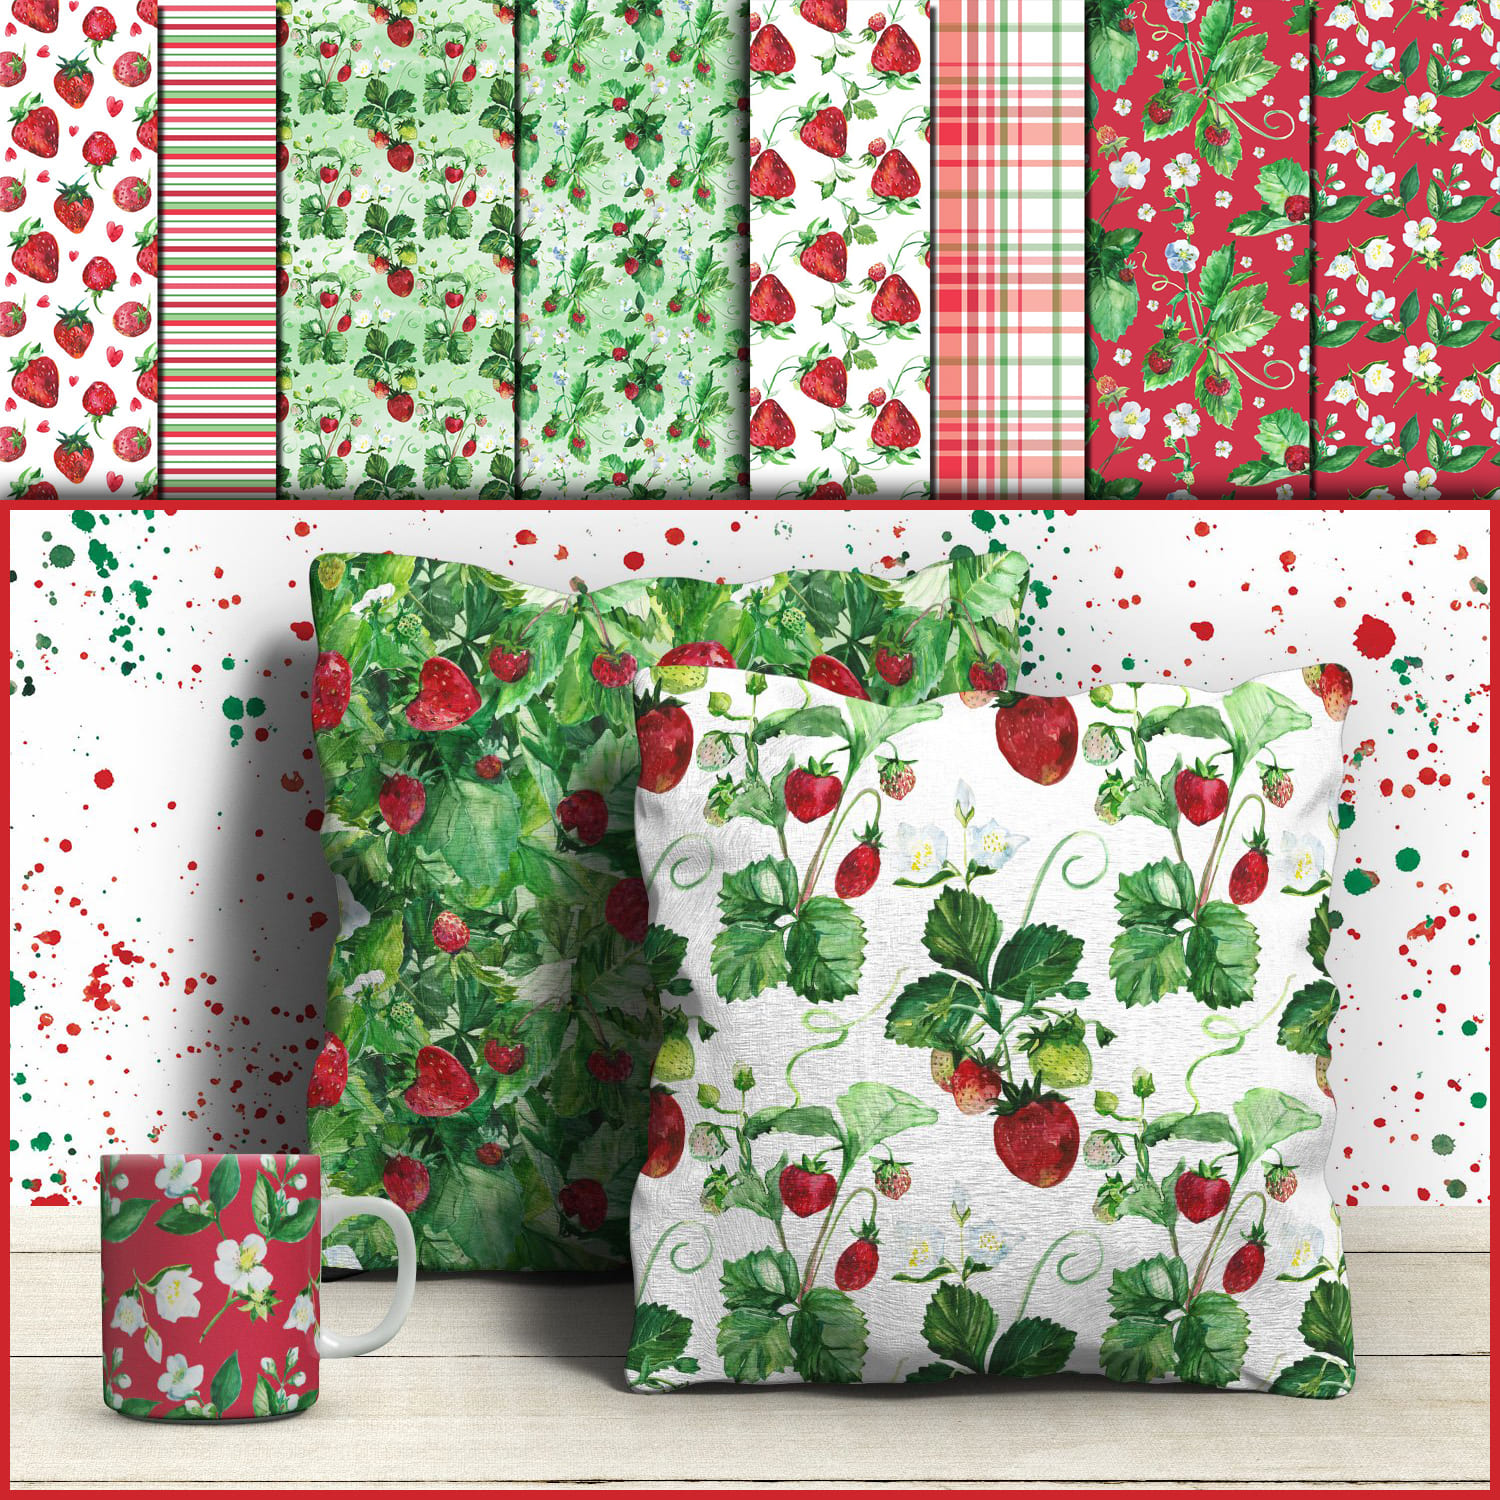 Patterns in a stripe, a cell and on a uniform background with strawberries.